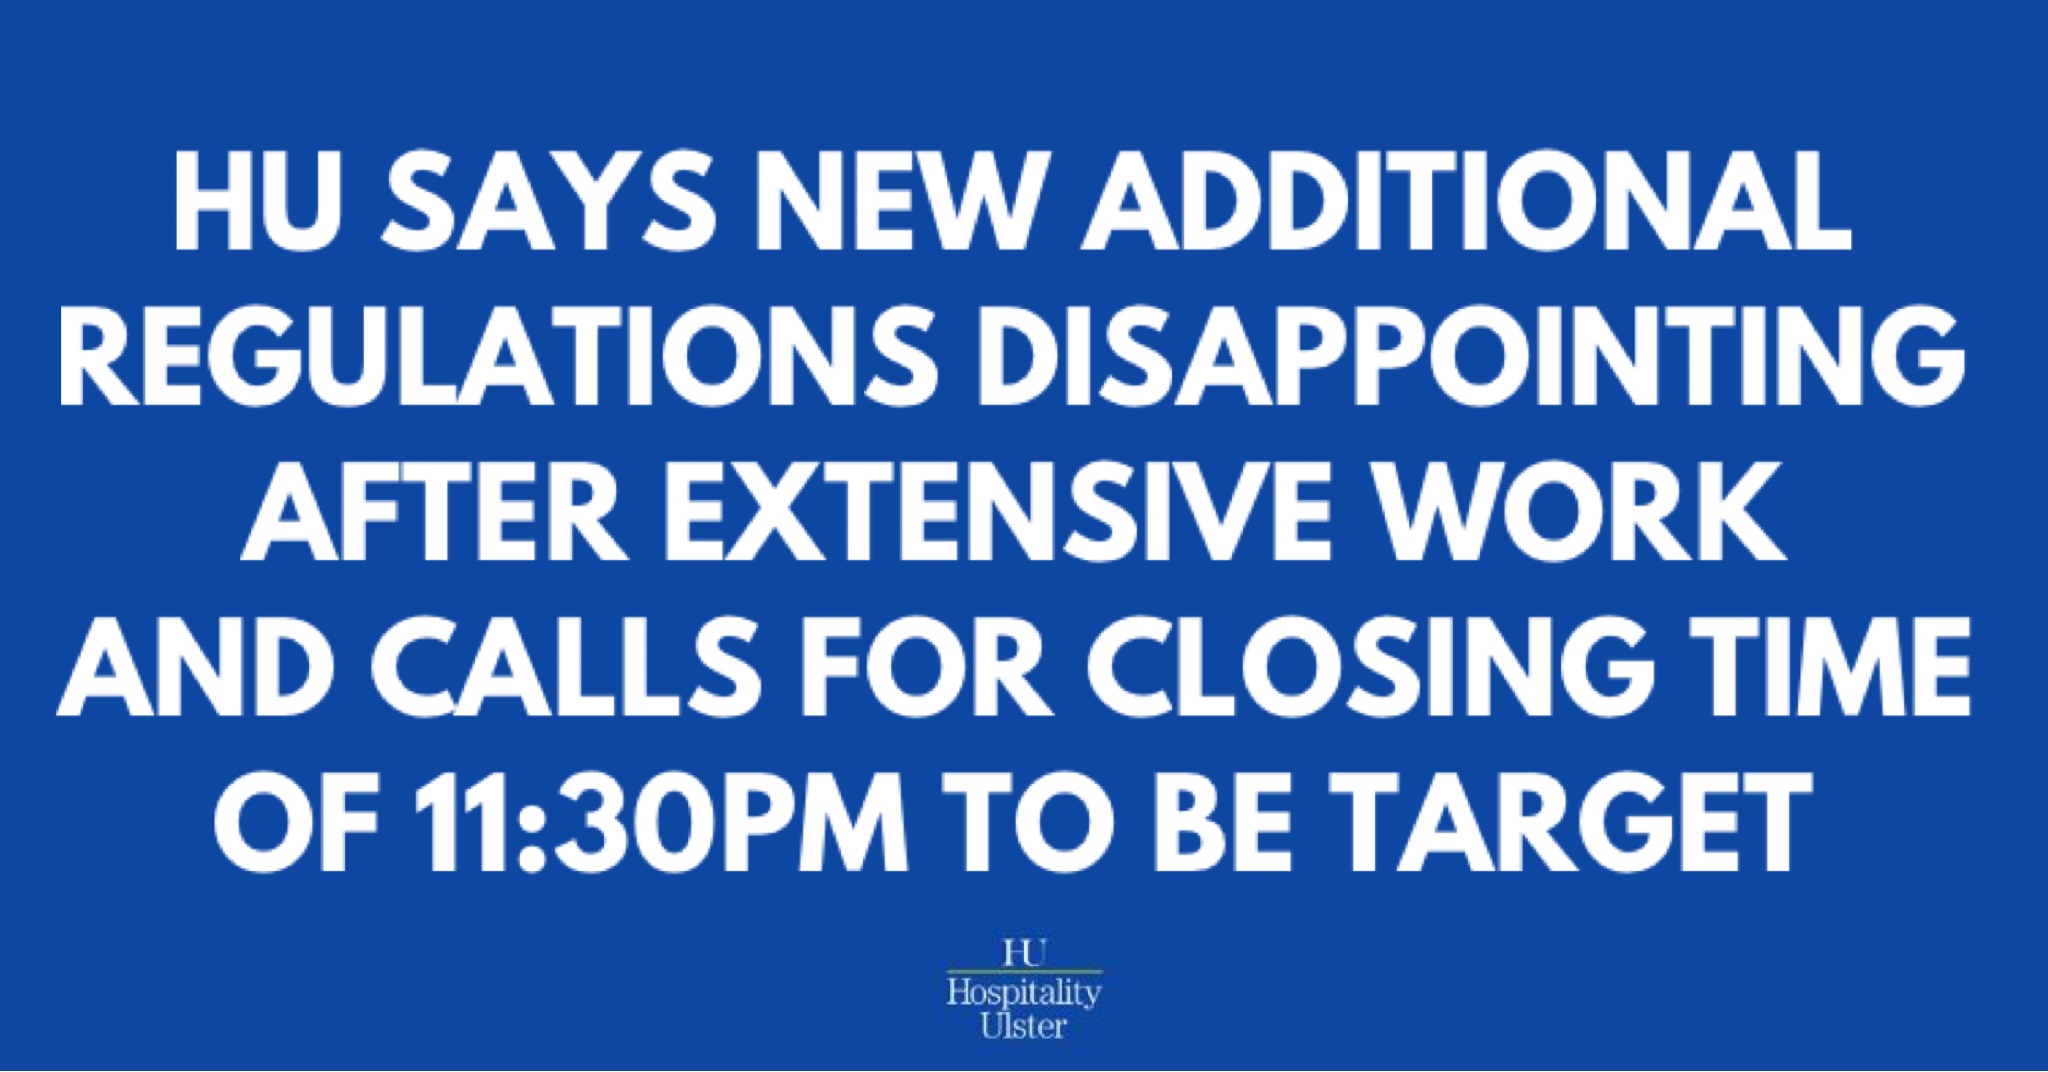 NEW ADDITIONAL REGULATIONS DISAPPOINTING FOLLOWING EXTENSIVE WORK AND CALLS FOR 1130 CLOSING